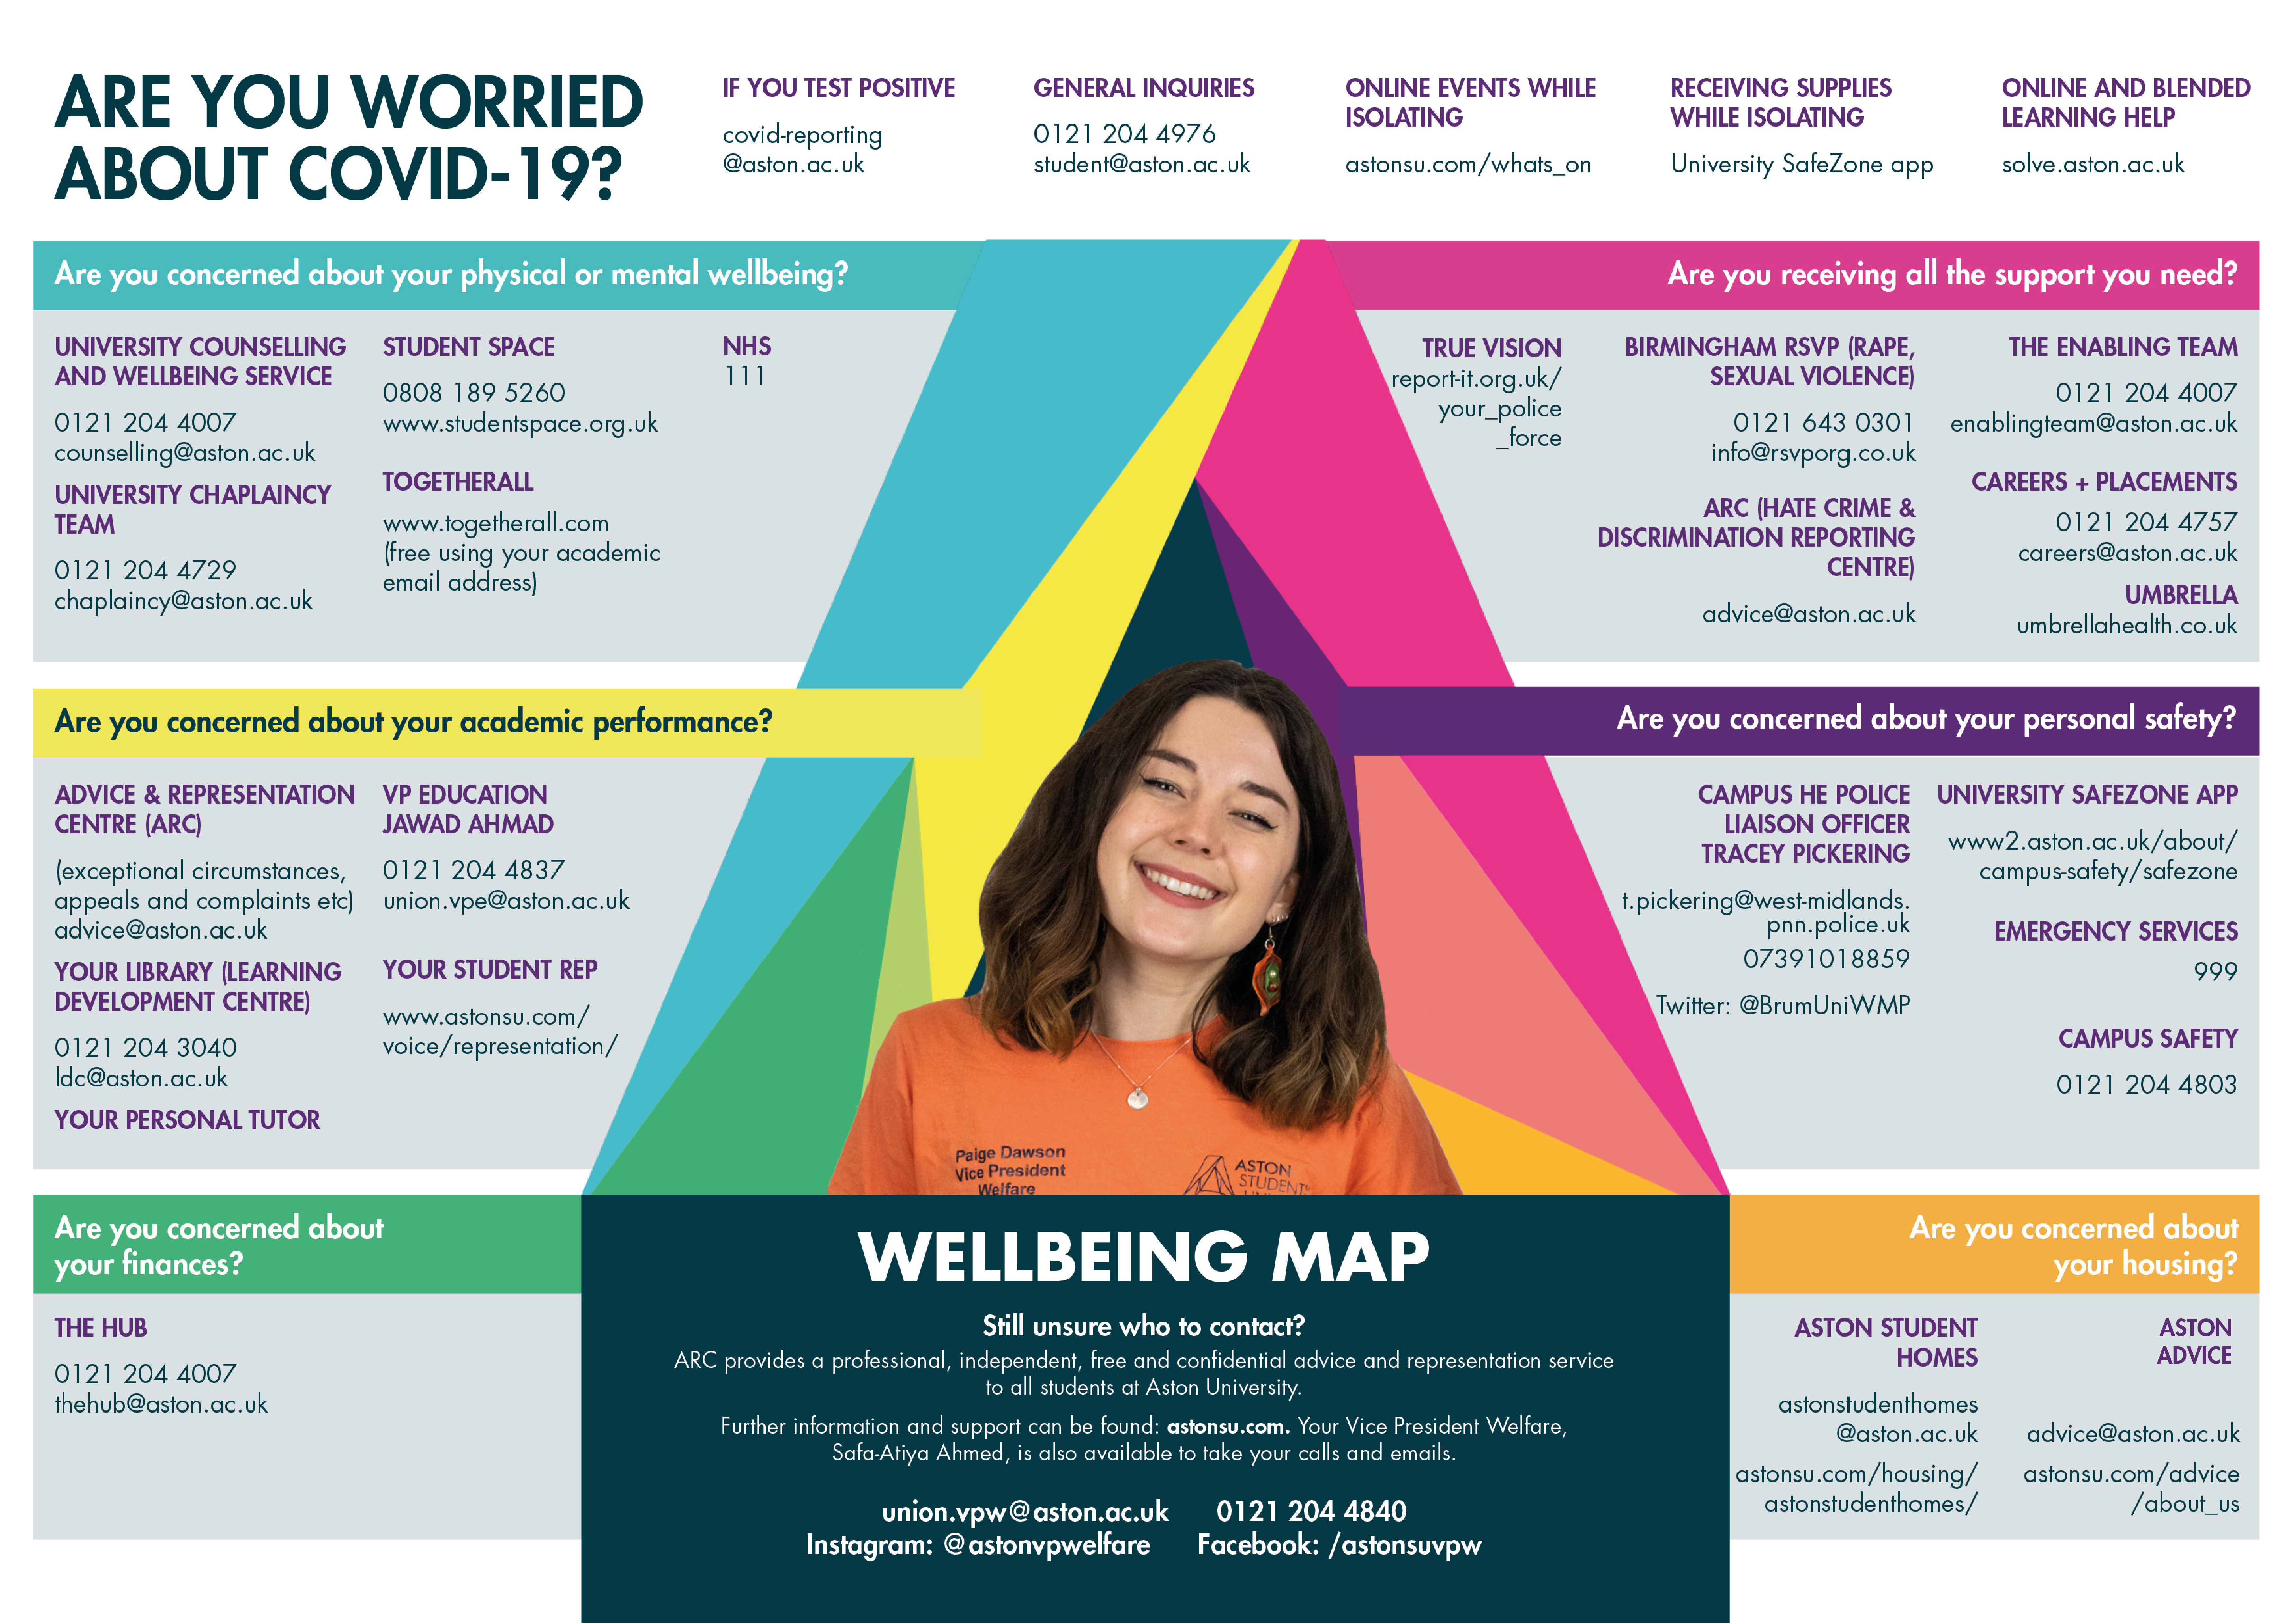 Wellbeing Map